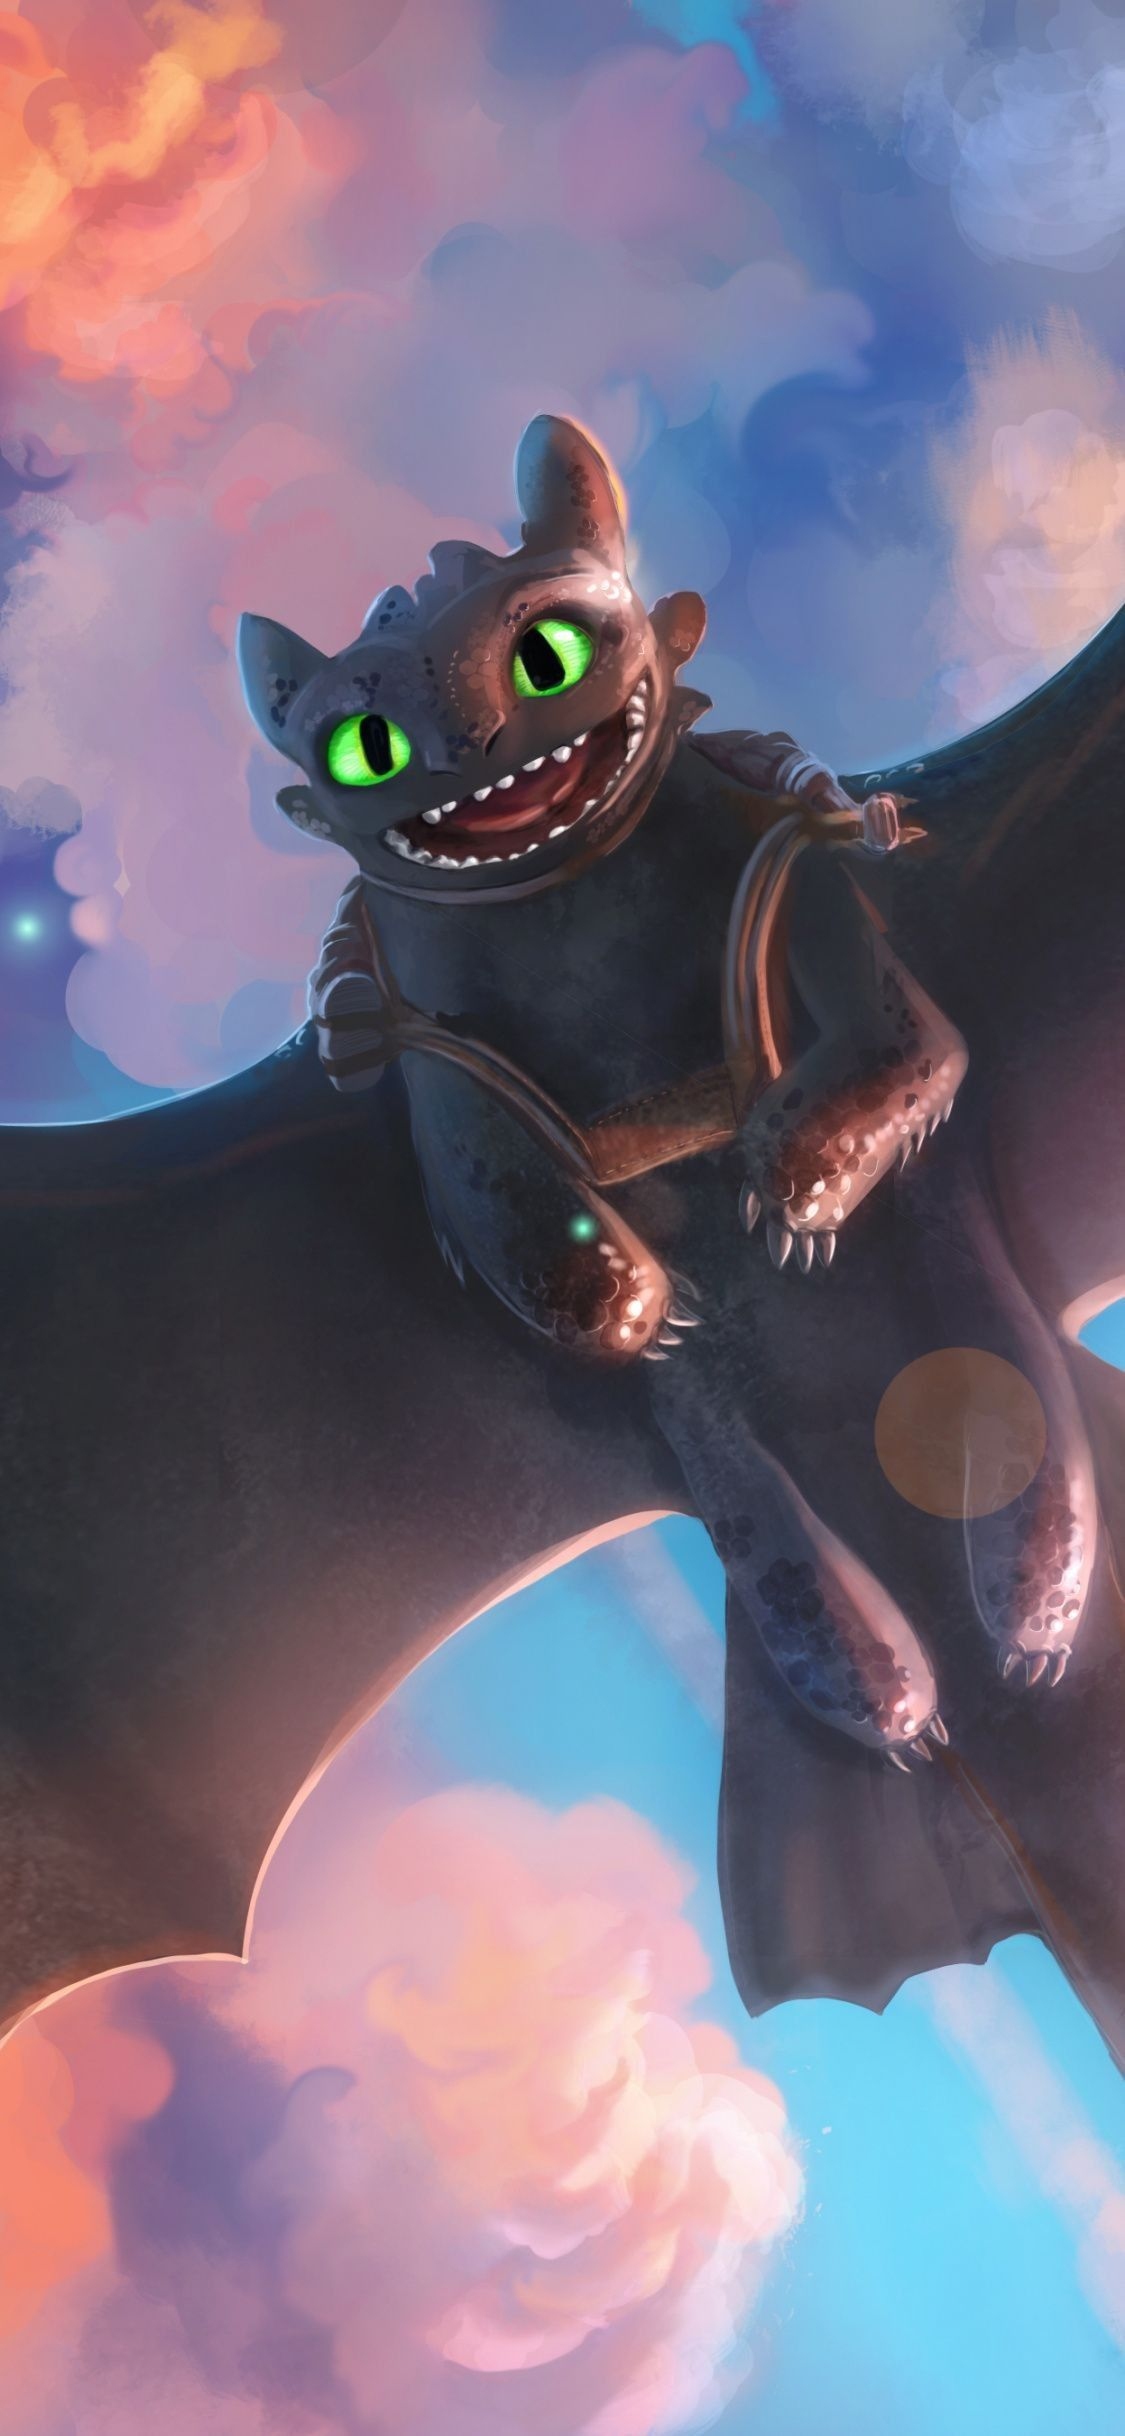 1125x2436 Pin by Samuel Goral on Tapety | How train your dragon, Night fury dragon, How to train drag